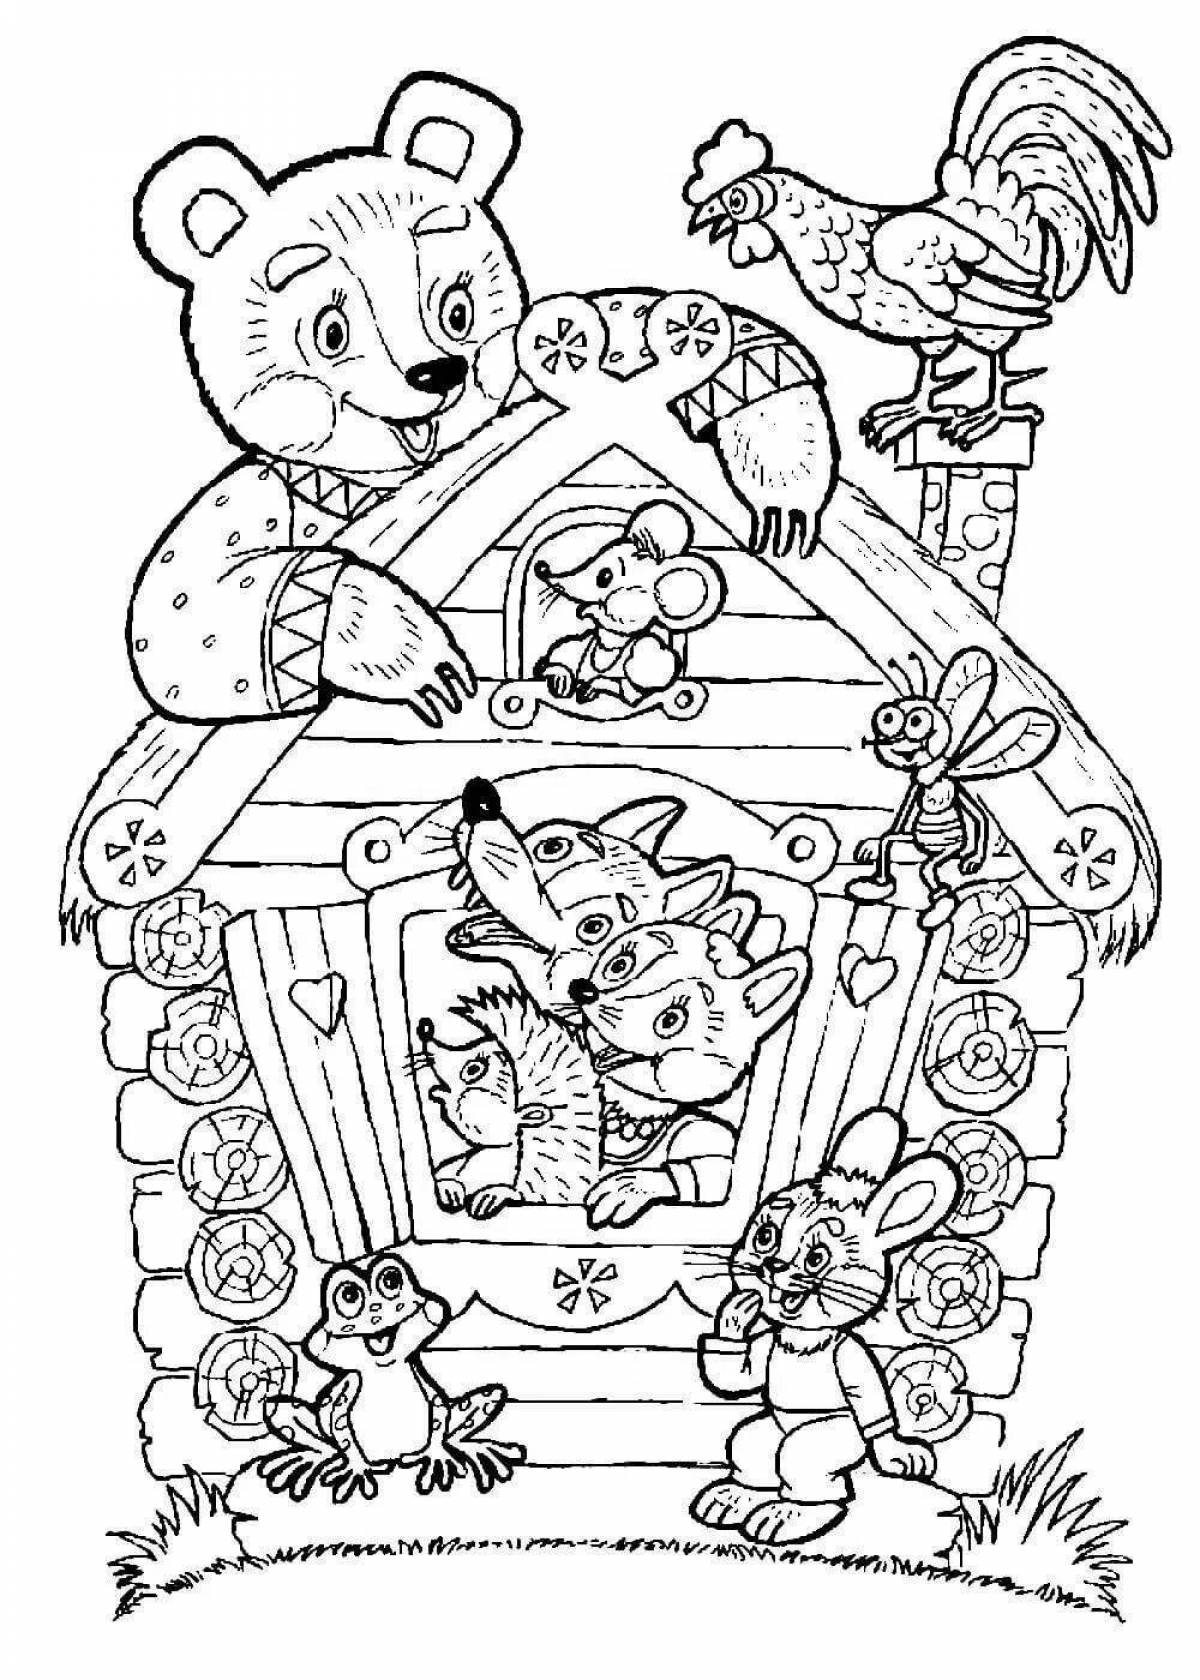 Coloring pages heroes of fairy tales